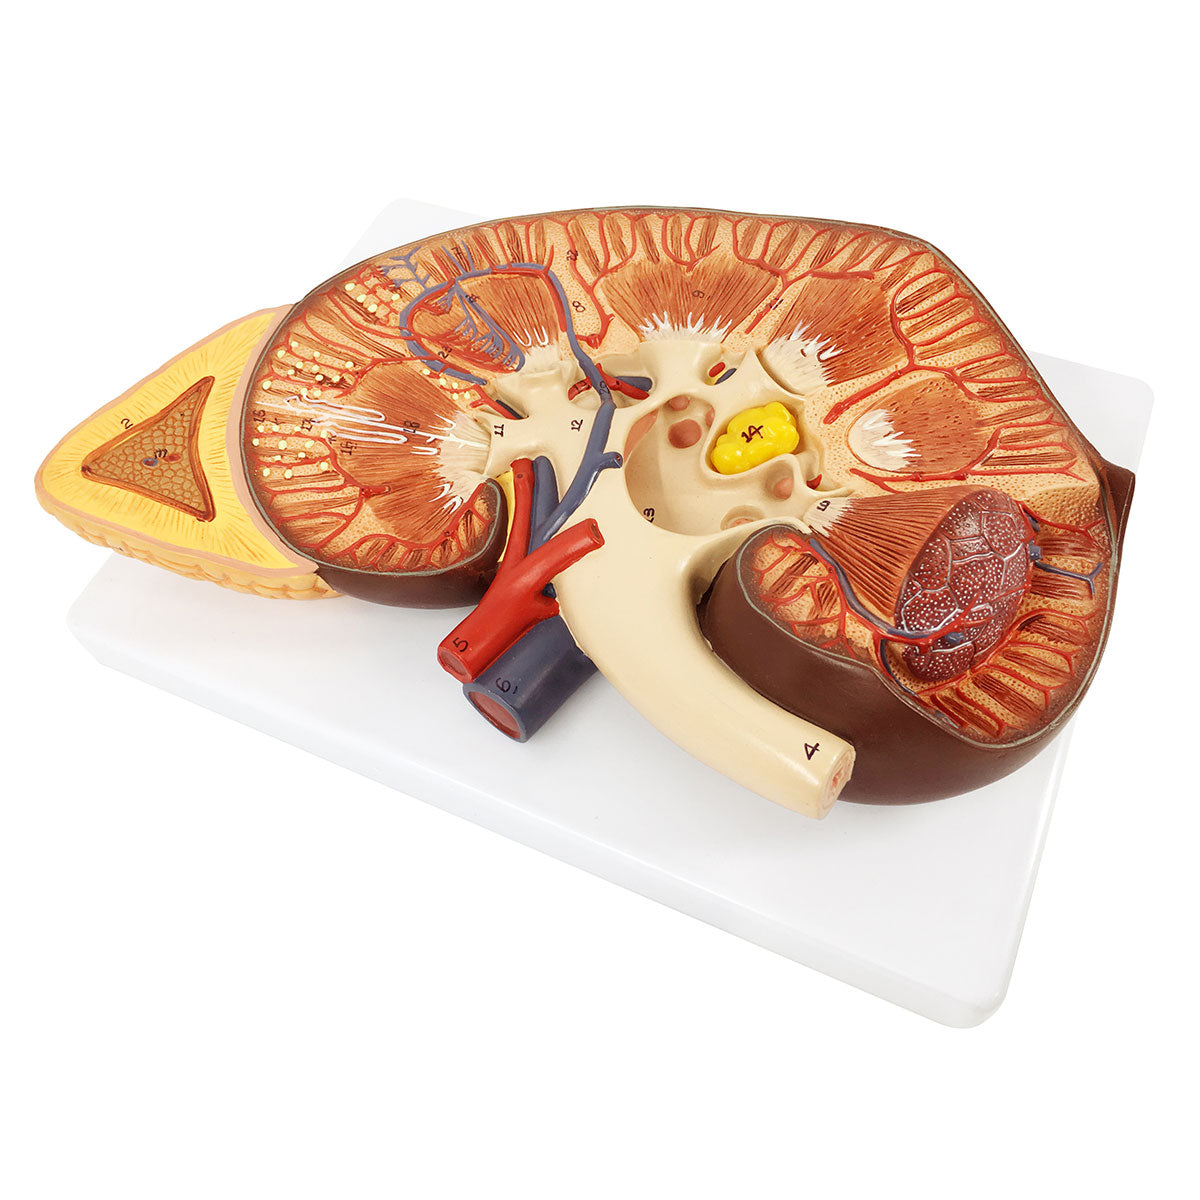 Evotech Scientific Human Kidney Model 3X Life-Size Model Includes Anatomy of Adrenal Gland and Nephrons